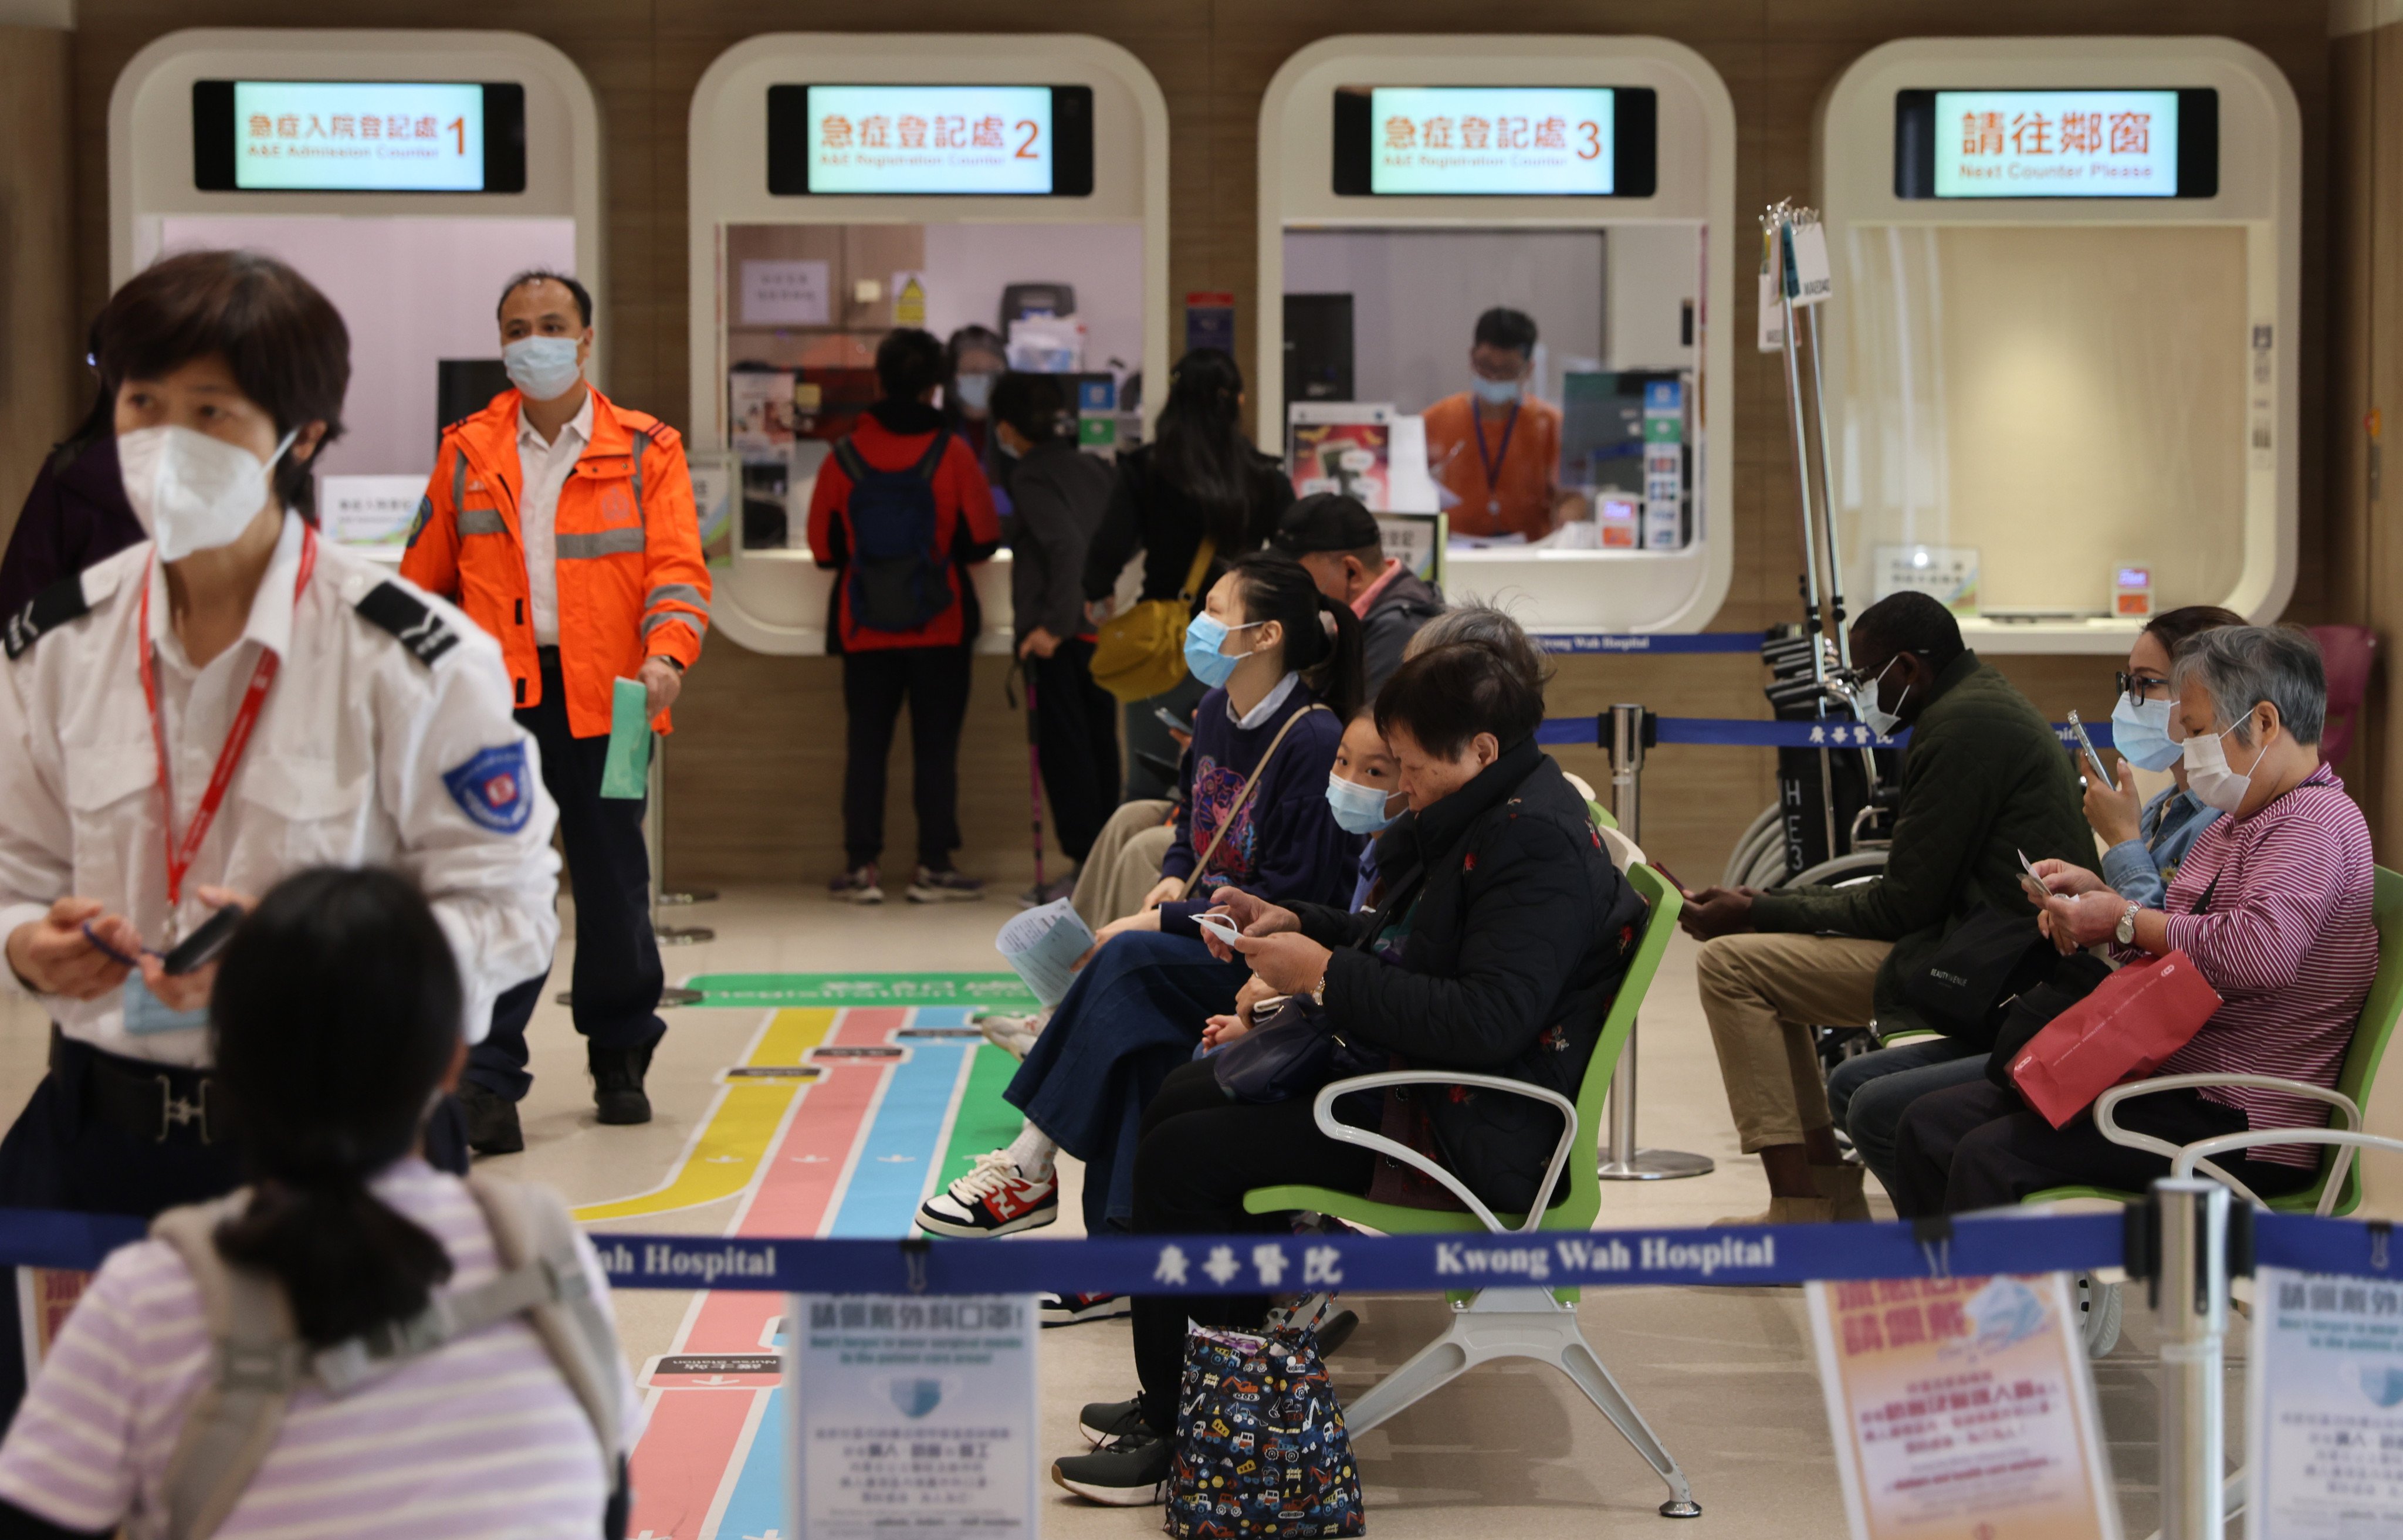 A hospital waiting area. Authorities say 1,032 people who went to A&E departments from February 9 to 18 left before being seen and asked for refunds. Photo: Yik Yeung-man